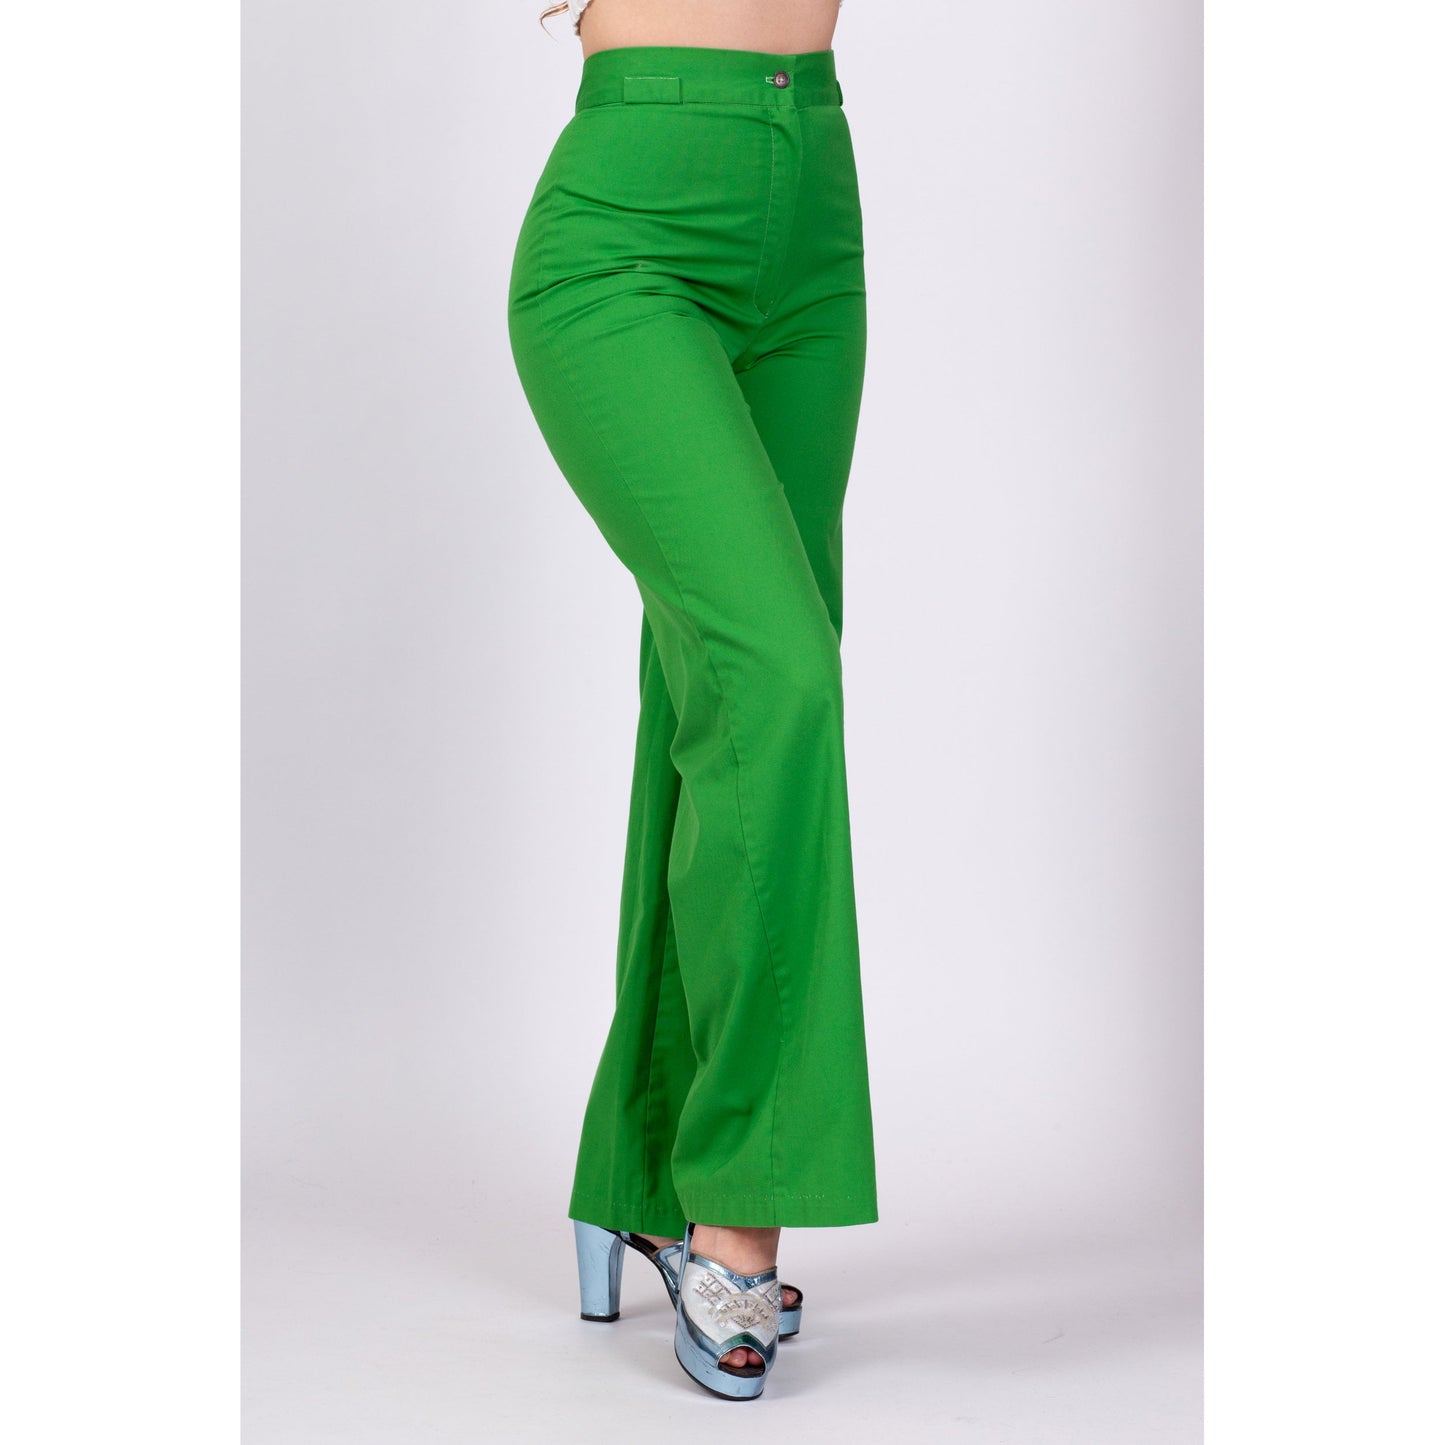 70s Green High Waisted Pants - Small to Medium 